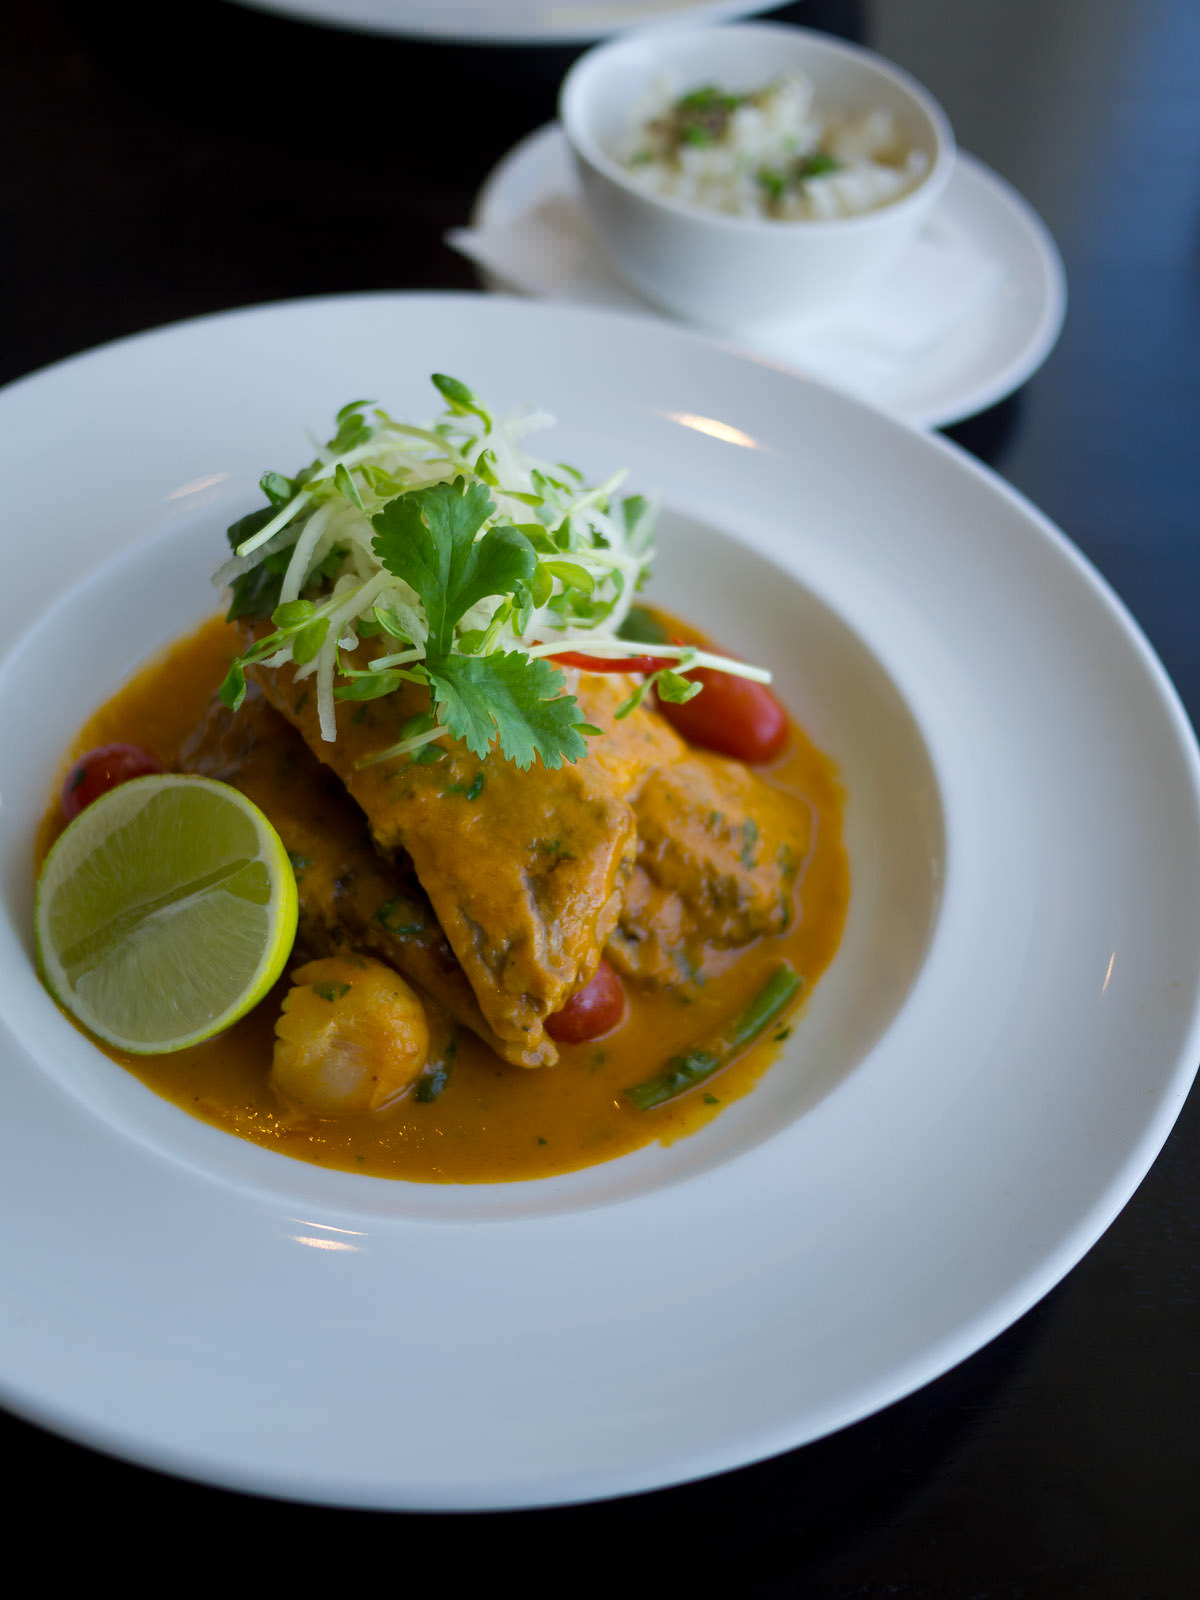 Double roasted duck, slow roasted in rich Thai curry sauce with lychees, tamarind, lemongrass & coconut rice (AU$45.50)